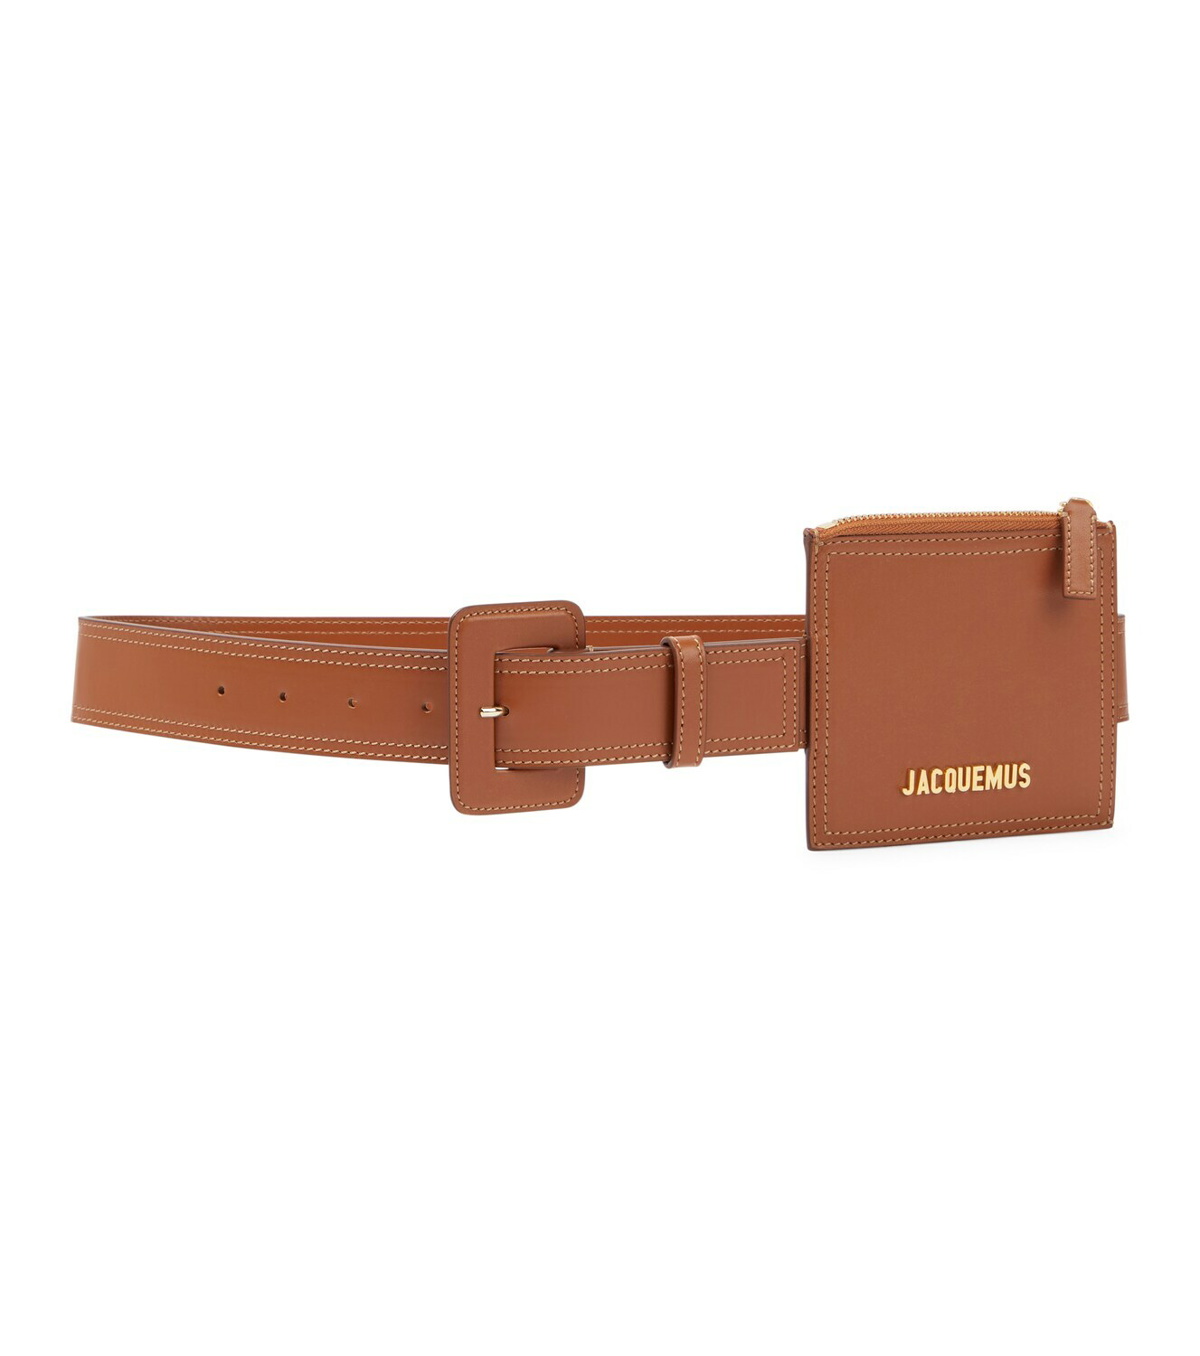 Jacquemus - Leather belt with pouch Jacquemus